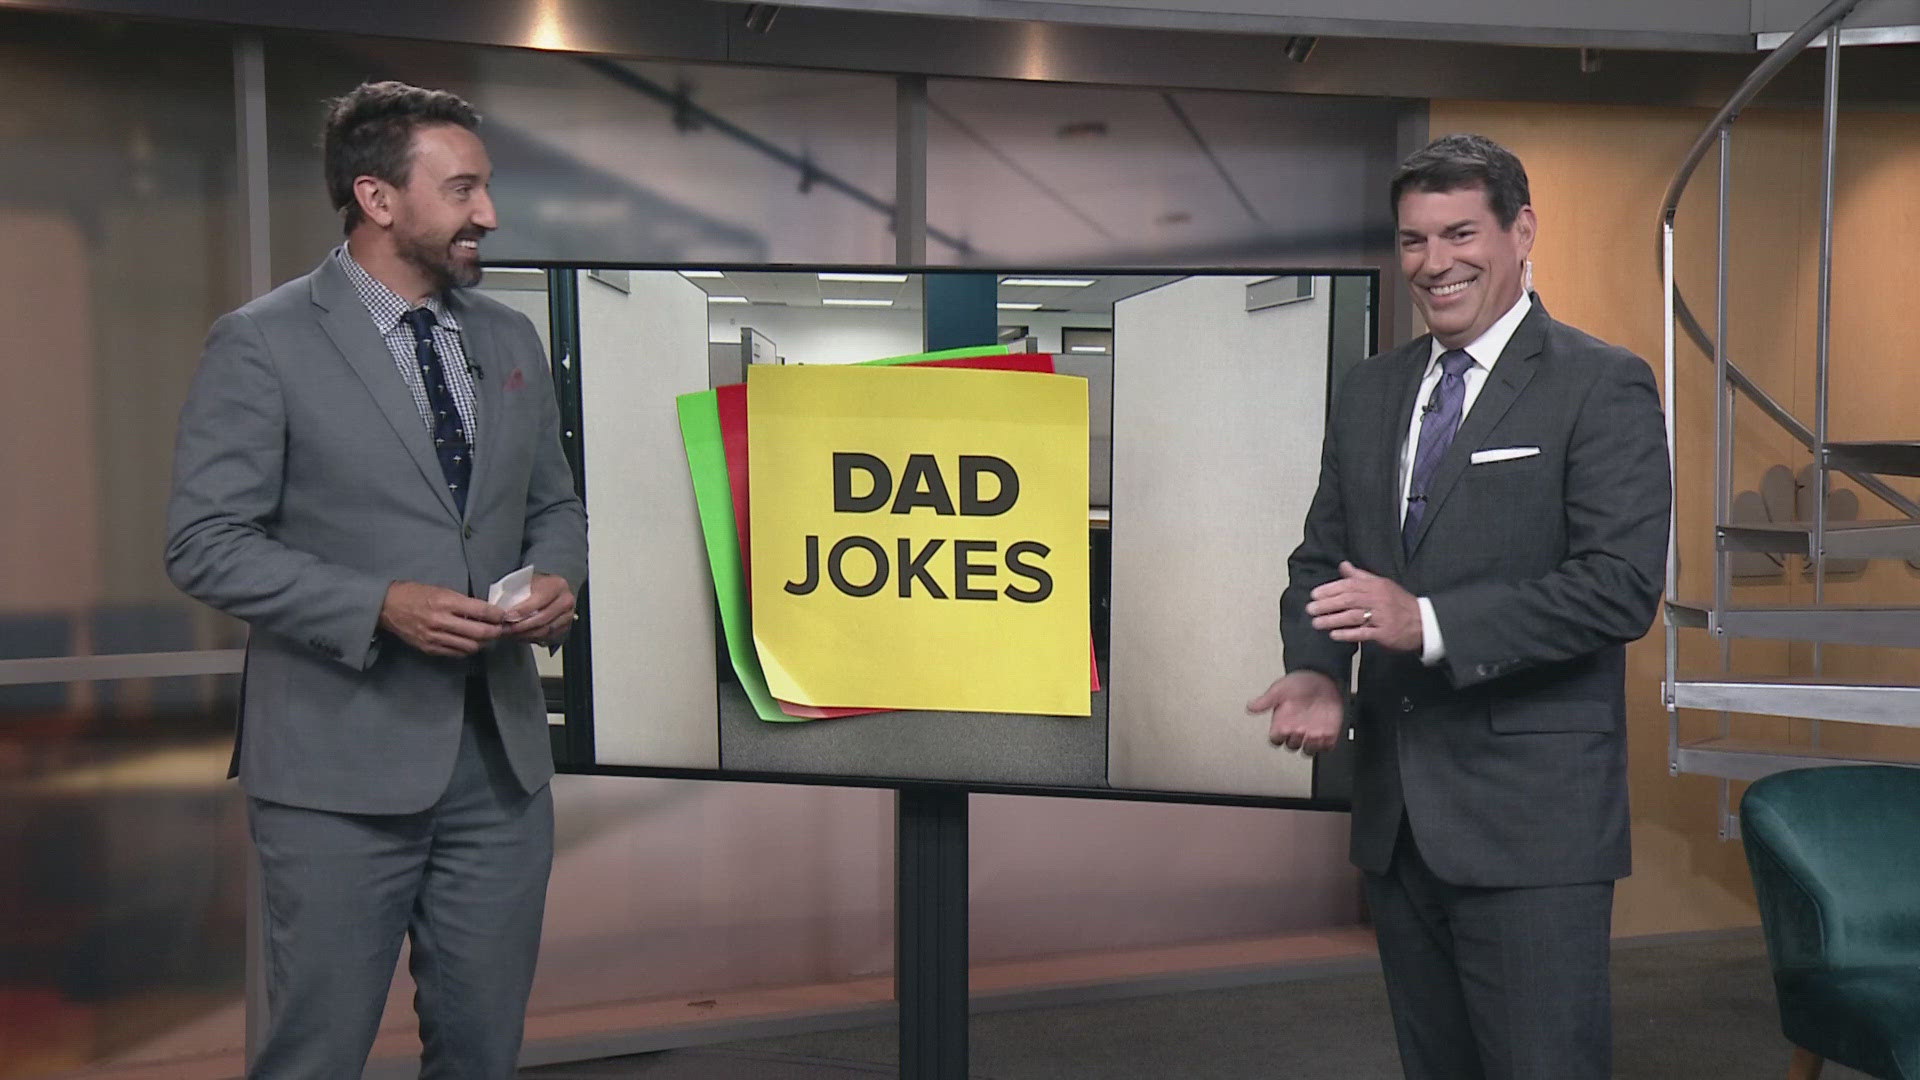 What do you call a lonely cheese? That's one of today's dad jokes with Matt Wintz and Dave Chudowsky here at WKYC Studios in Cleveland.